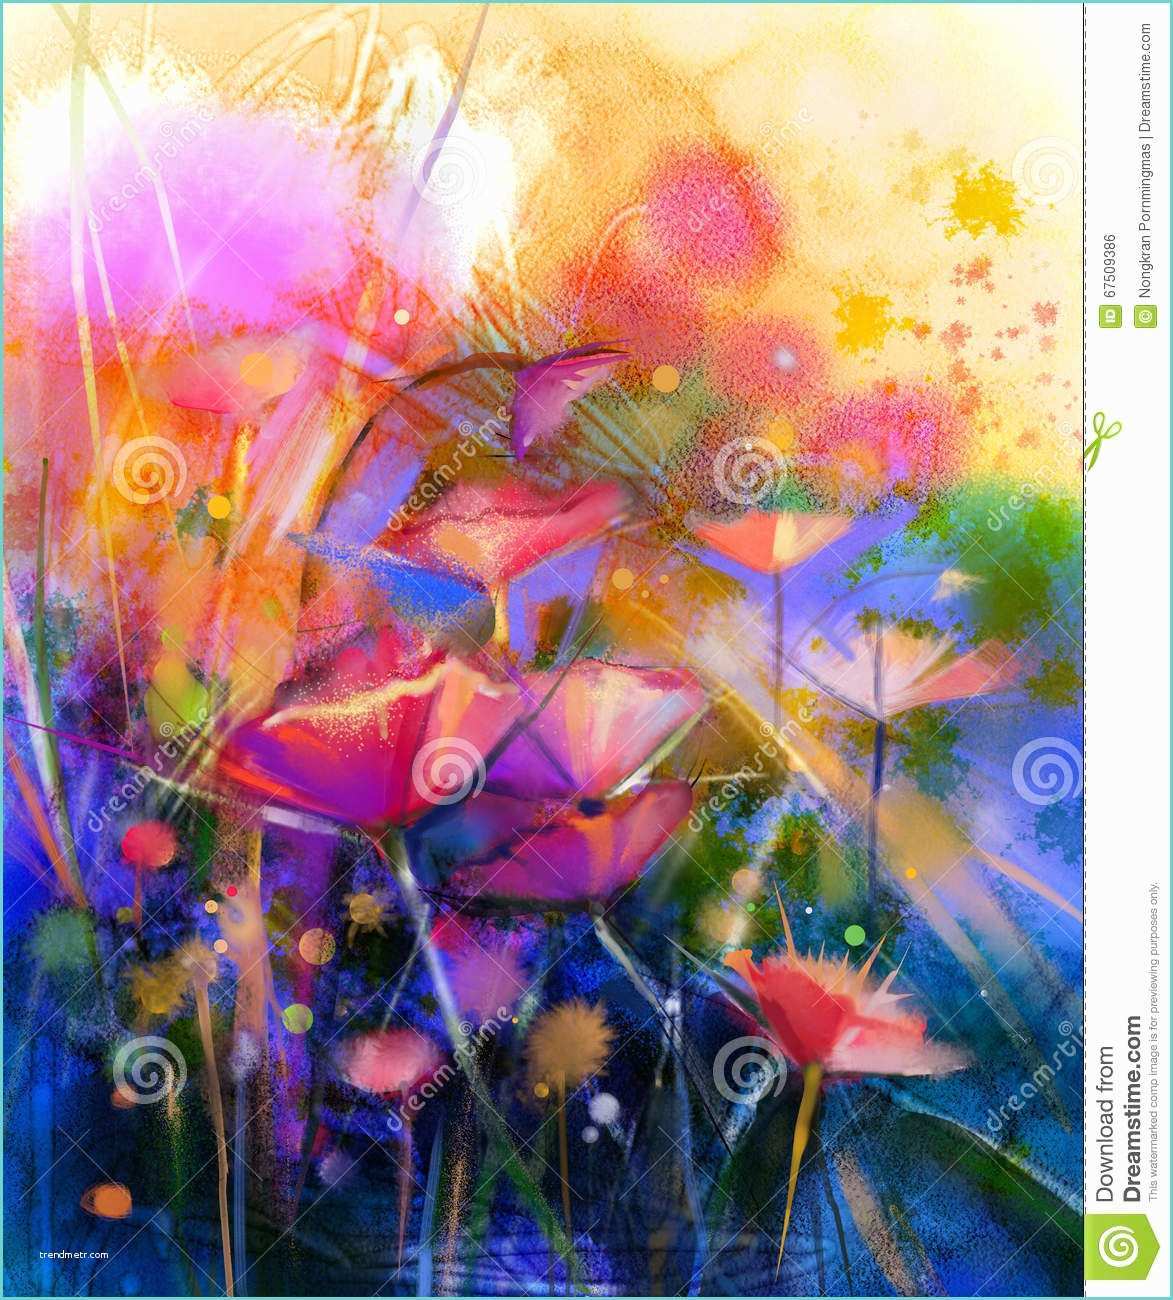 Peinture Abstraite Lhuile Abstract Daisy Flower Painting Royalty Free Stock